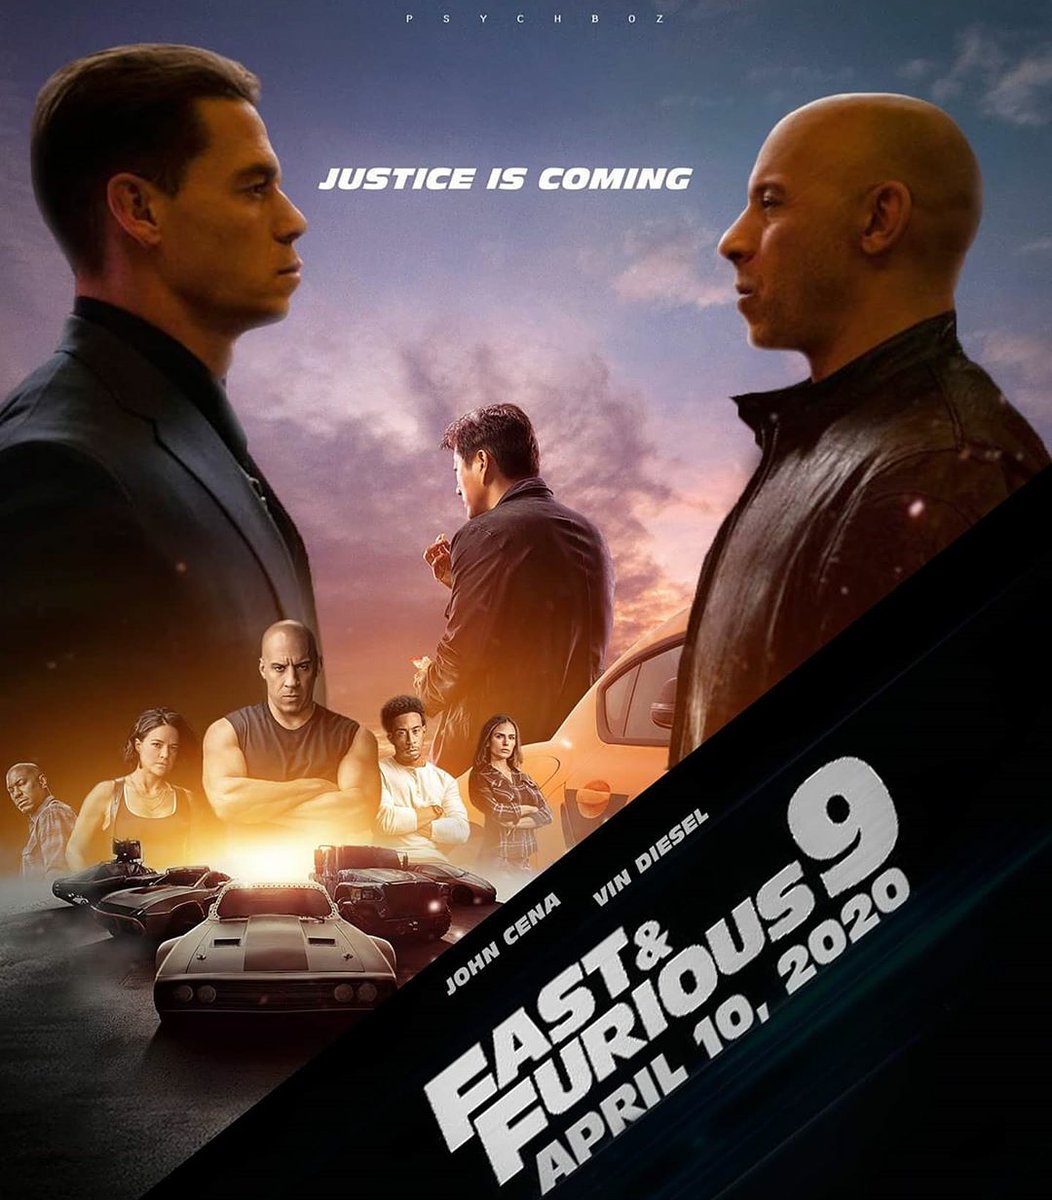 Fast & Furious 9: The Fast Saga Tuesday Special Price (2021) 7:30PM @ O'Brien Theatre in Arnprior